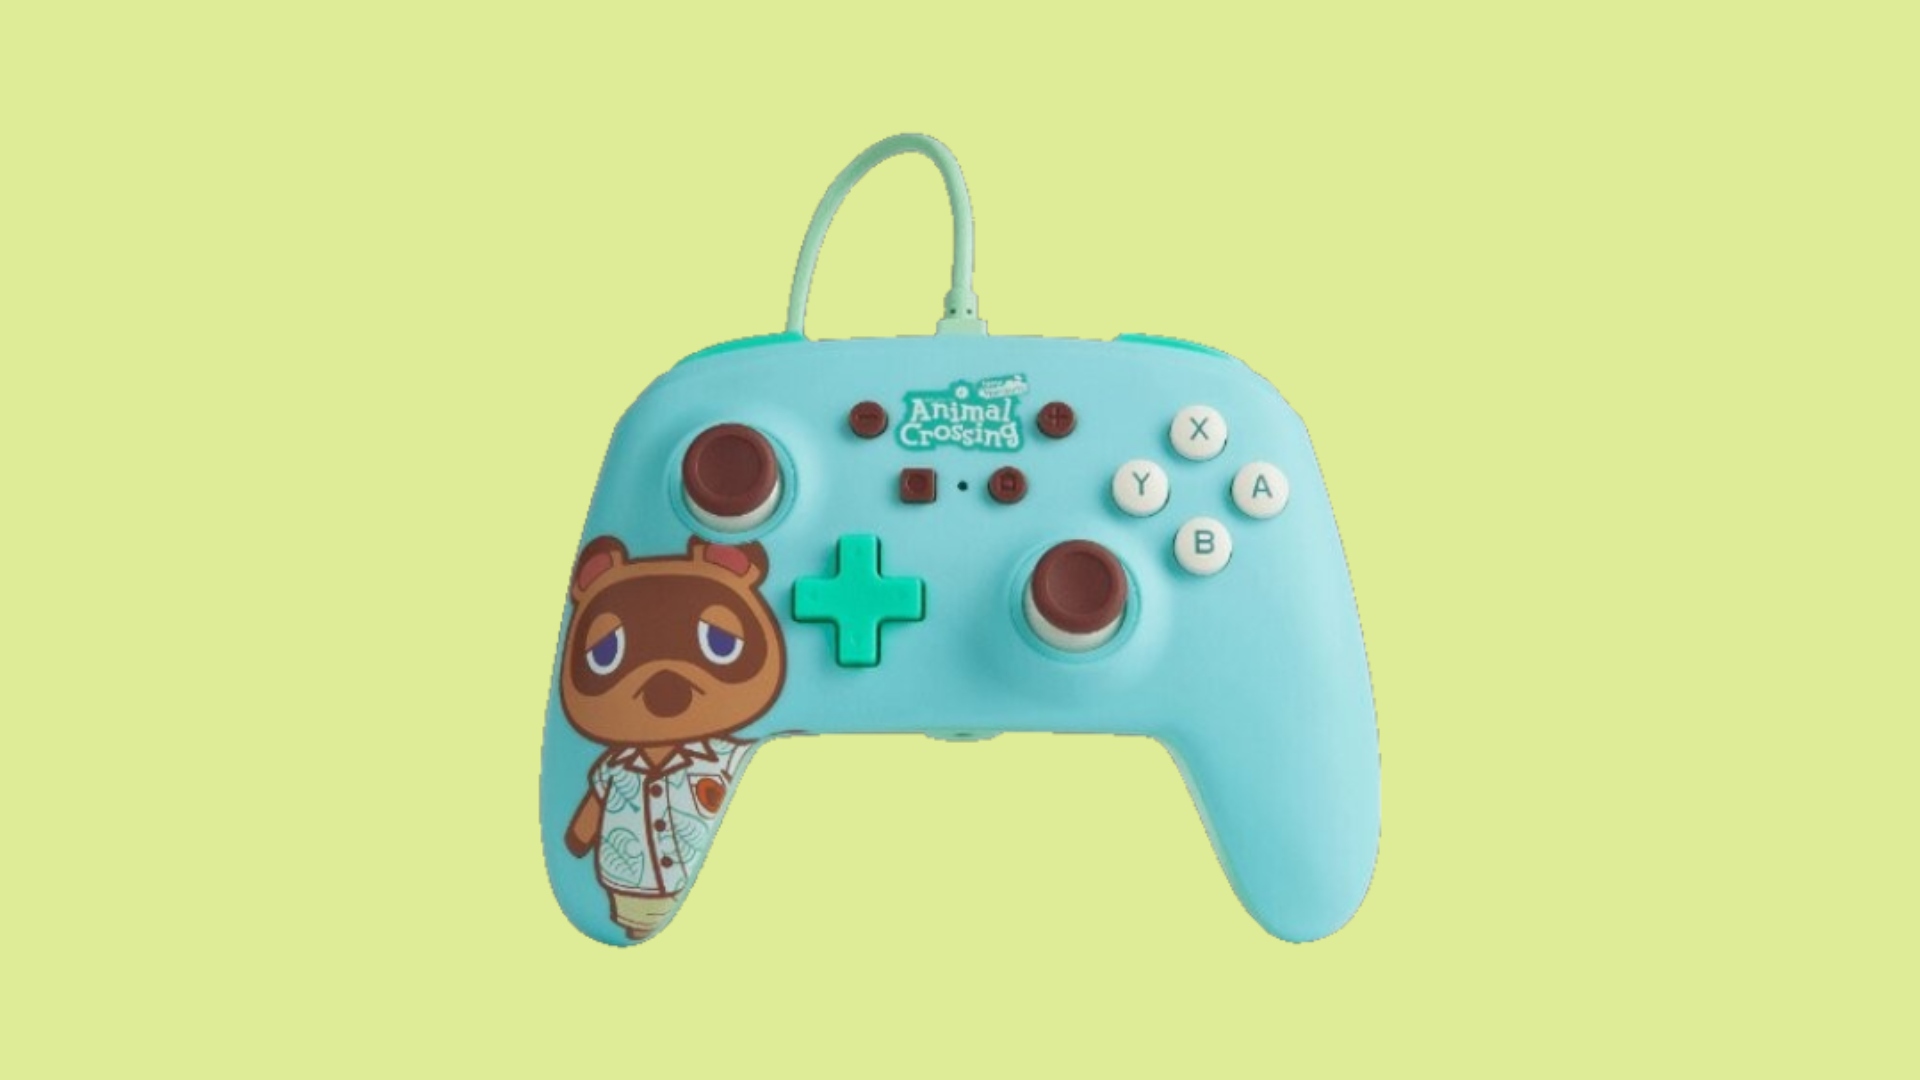 Best Nintendo Switch controllers: image shows a Switch controller with a picture of Tom Nook on it.